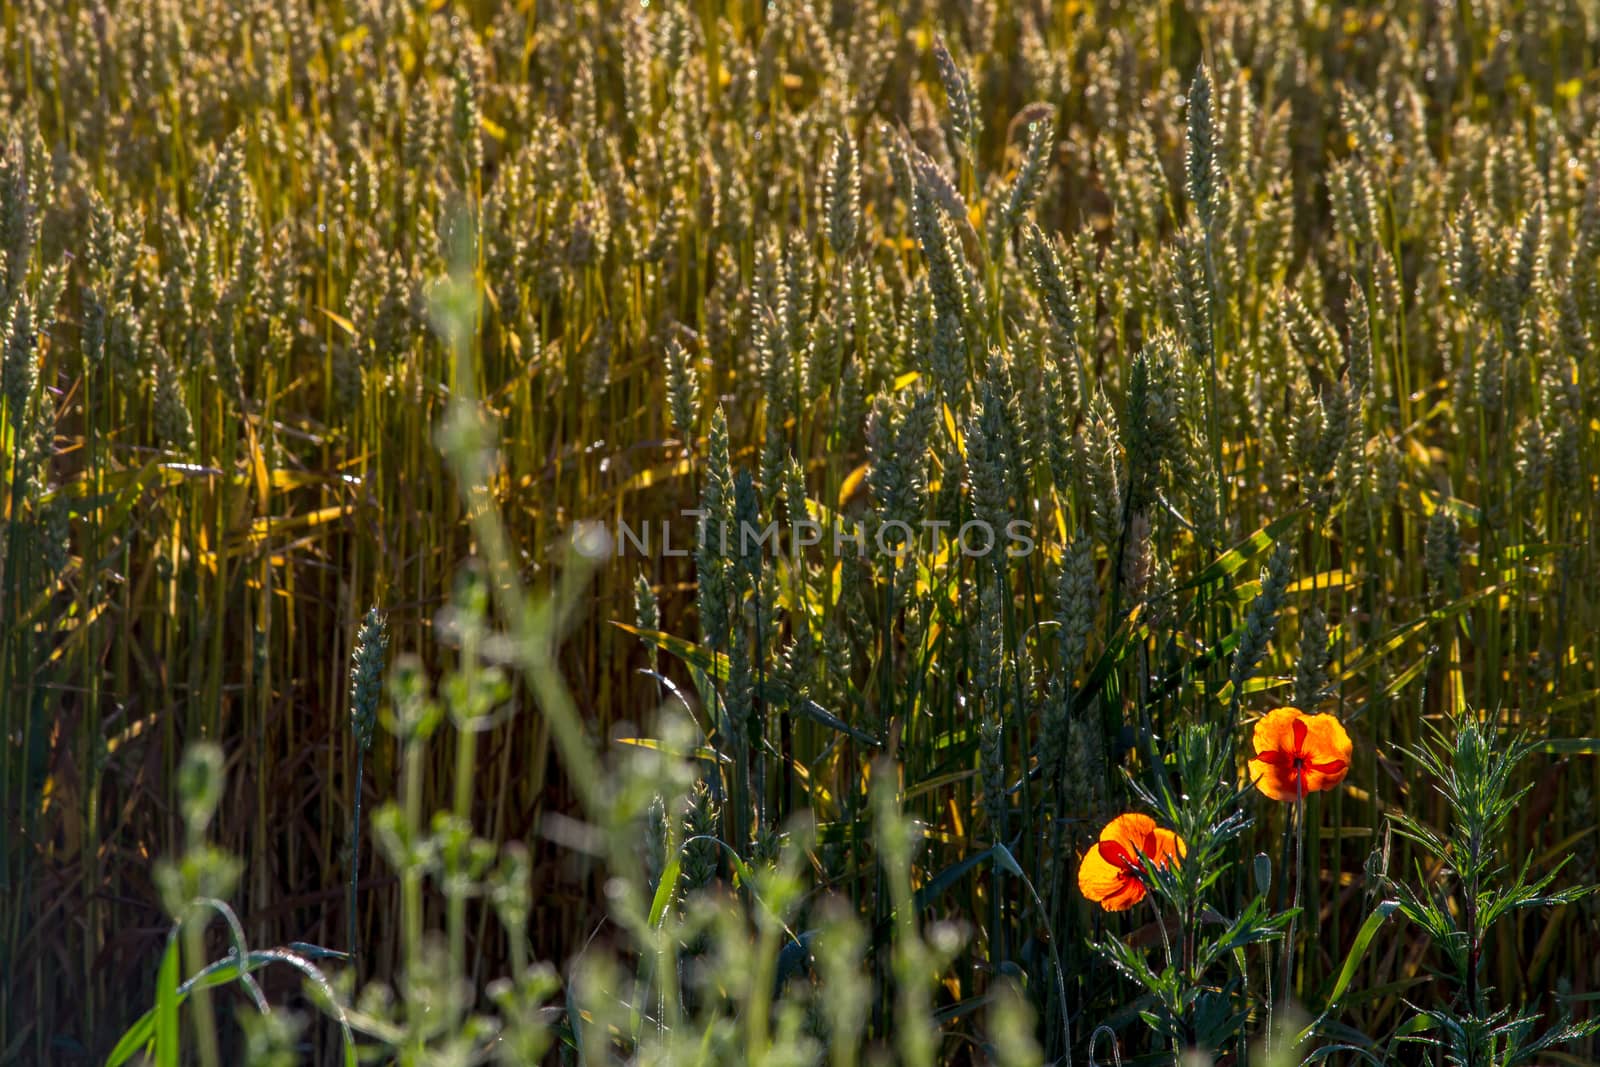 Background created with a close up of a cereal field in Latvia. Poppy in cereal field. Growing a natural product. Cereal is a grain used for food, for example wheat, maize, or rye. 

